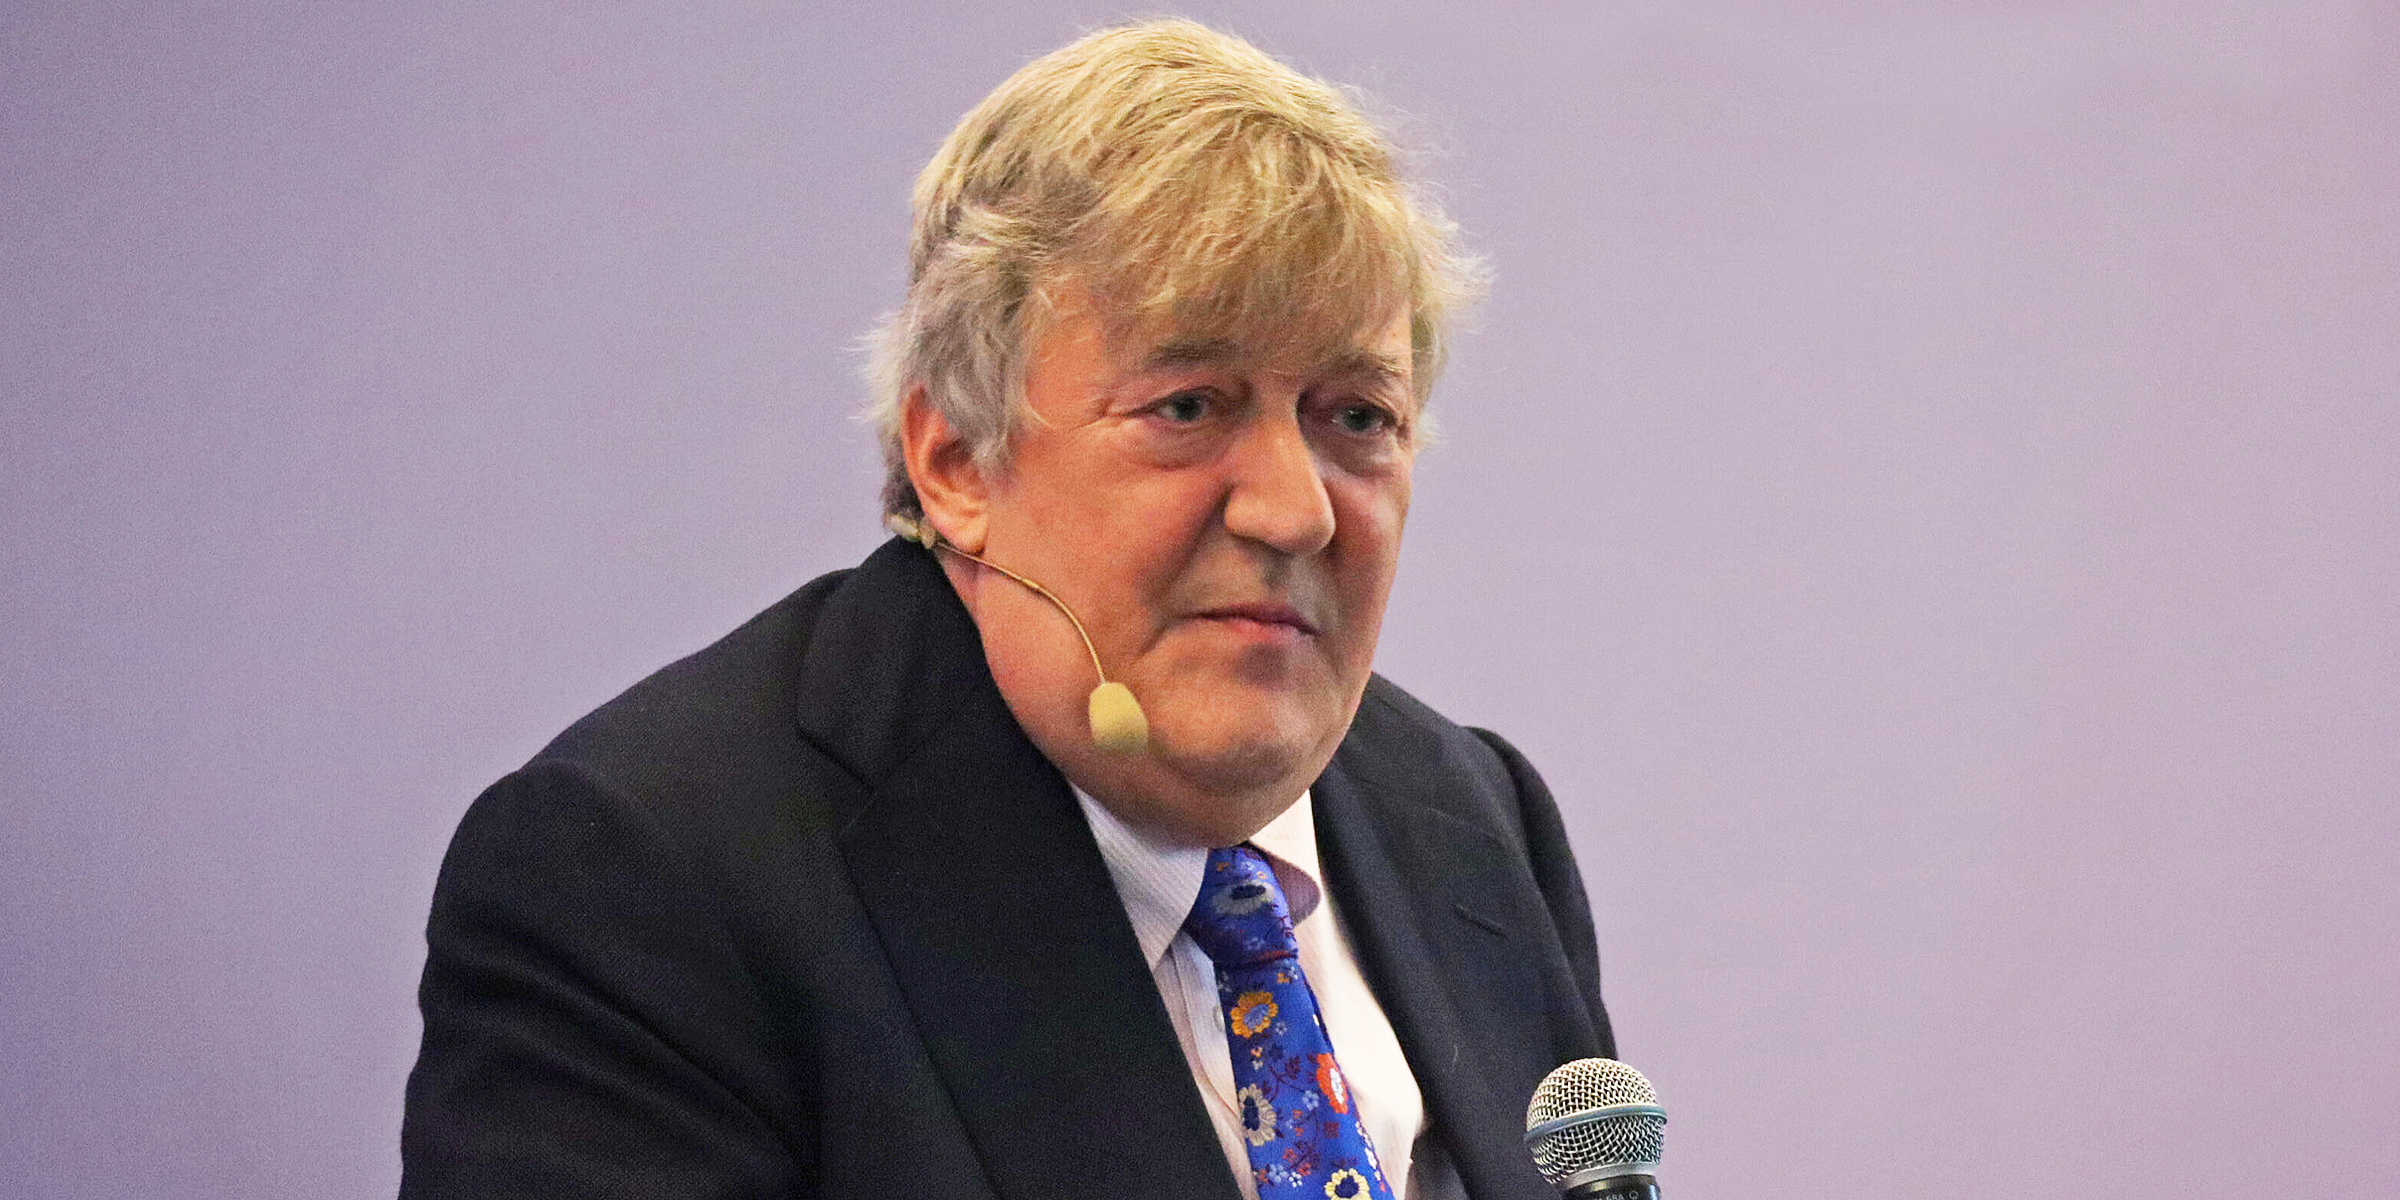 Stephen Fry | Source: Getty Images